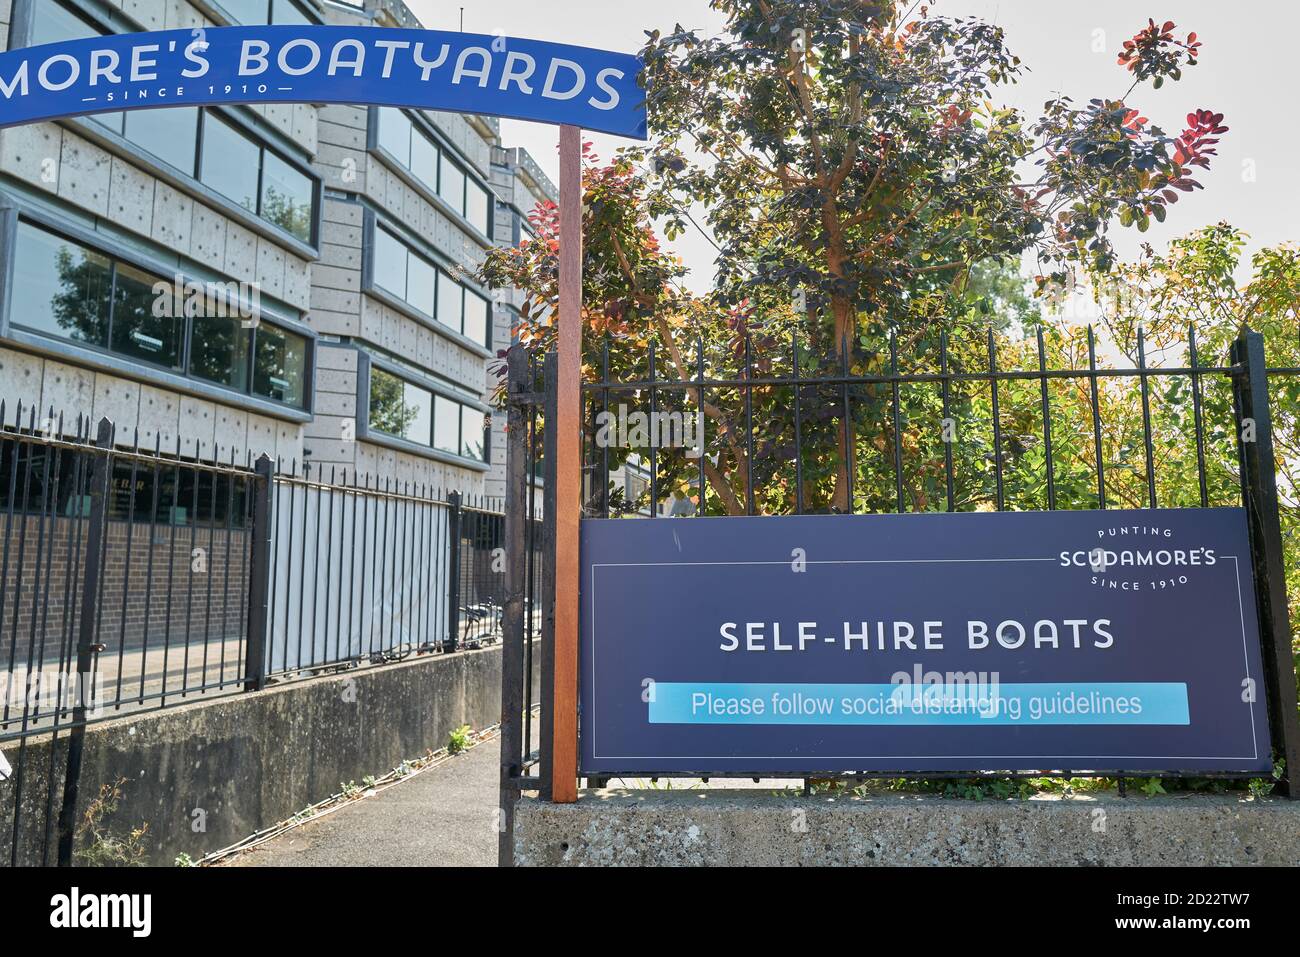 Entrance to Scudamore's boatyard for self-hire punts, Cambridge, England. Stock Photo